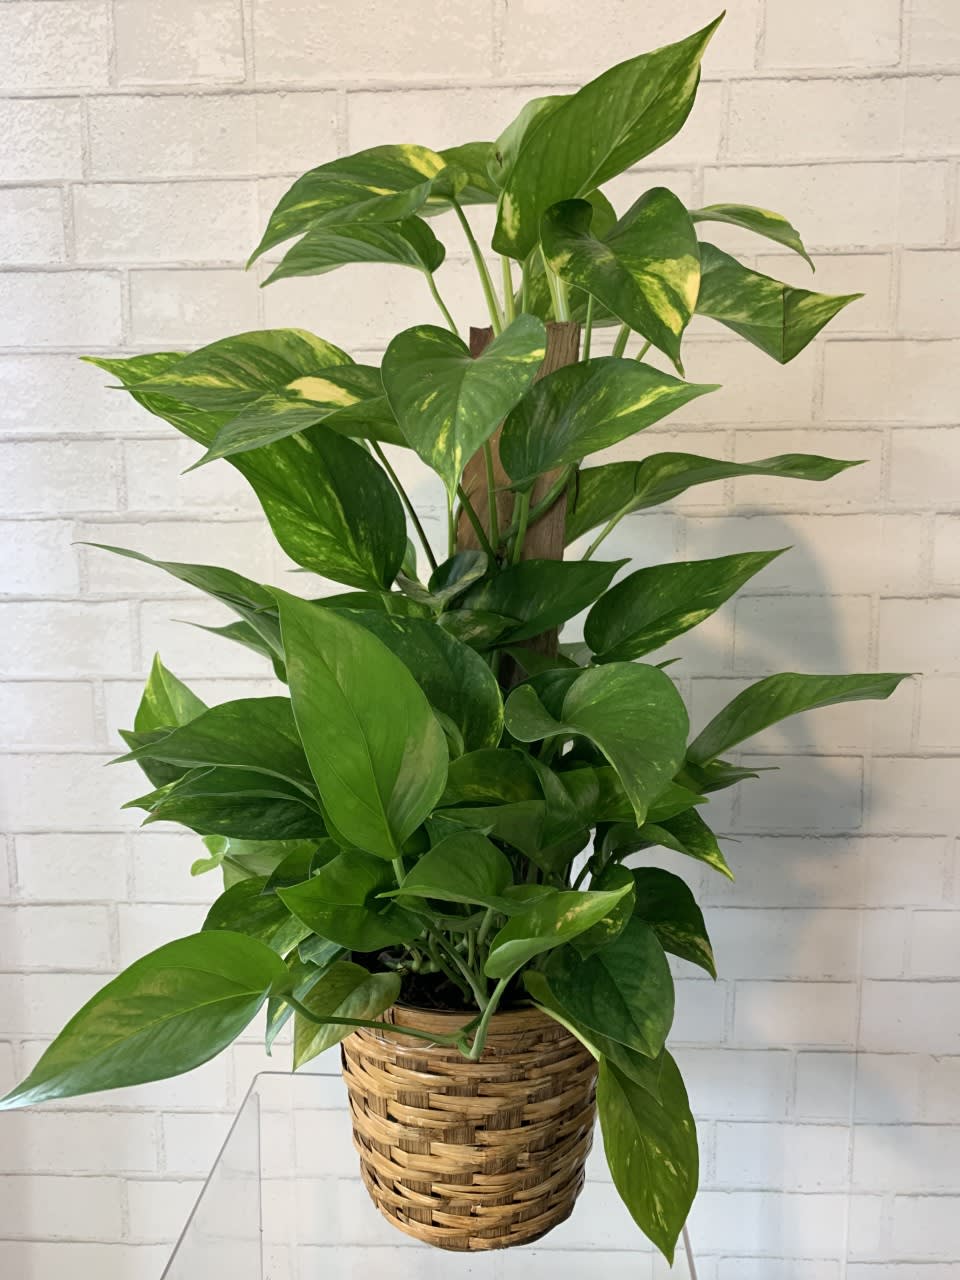 Pothos on Pole  - Pothos plant is an evergreen plant with thick, waxy, green, heart-shaped leaves with splashes of yellow. A great way to add some green to your home and easy to manage! Includes a wicker basket and a bow. Upgrade your plant to a decorative container!